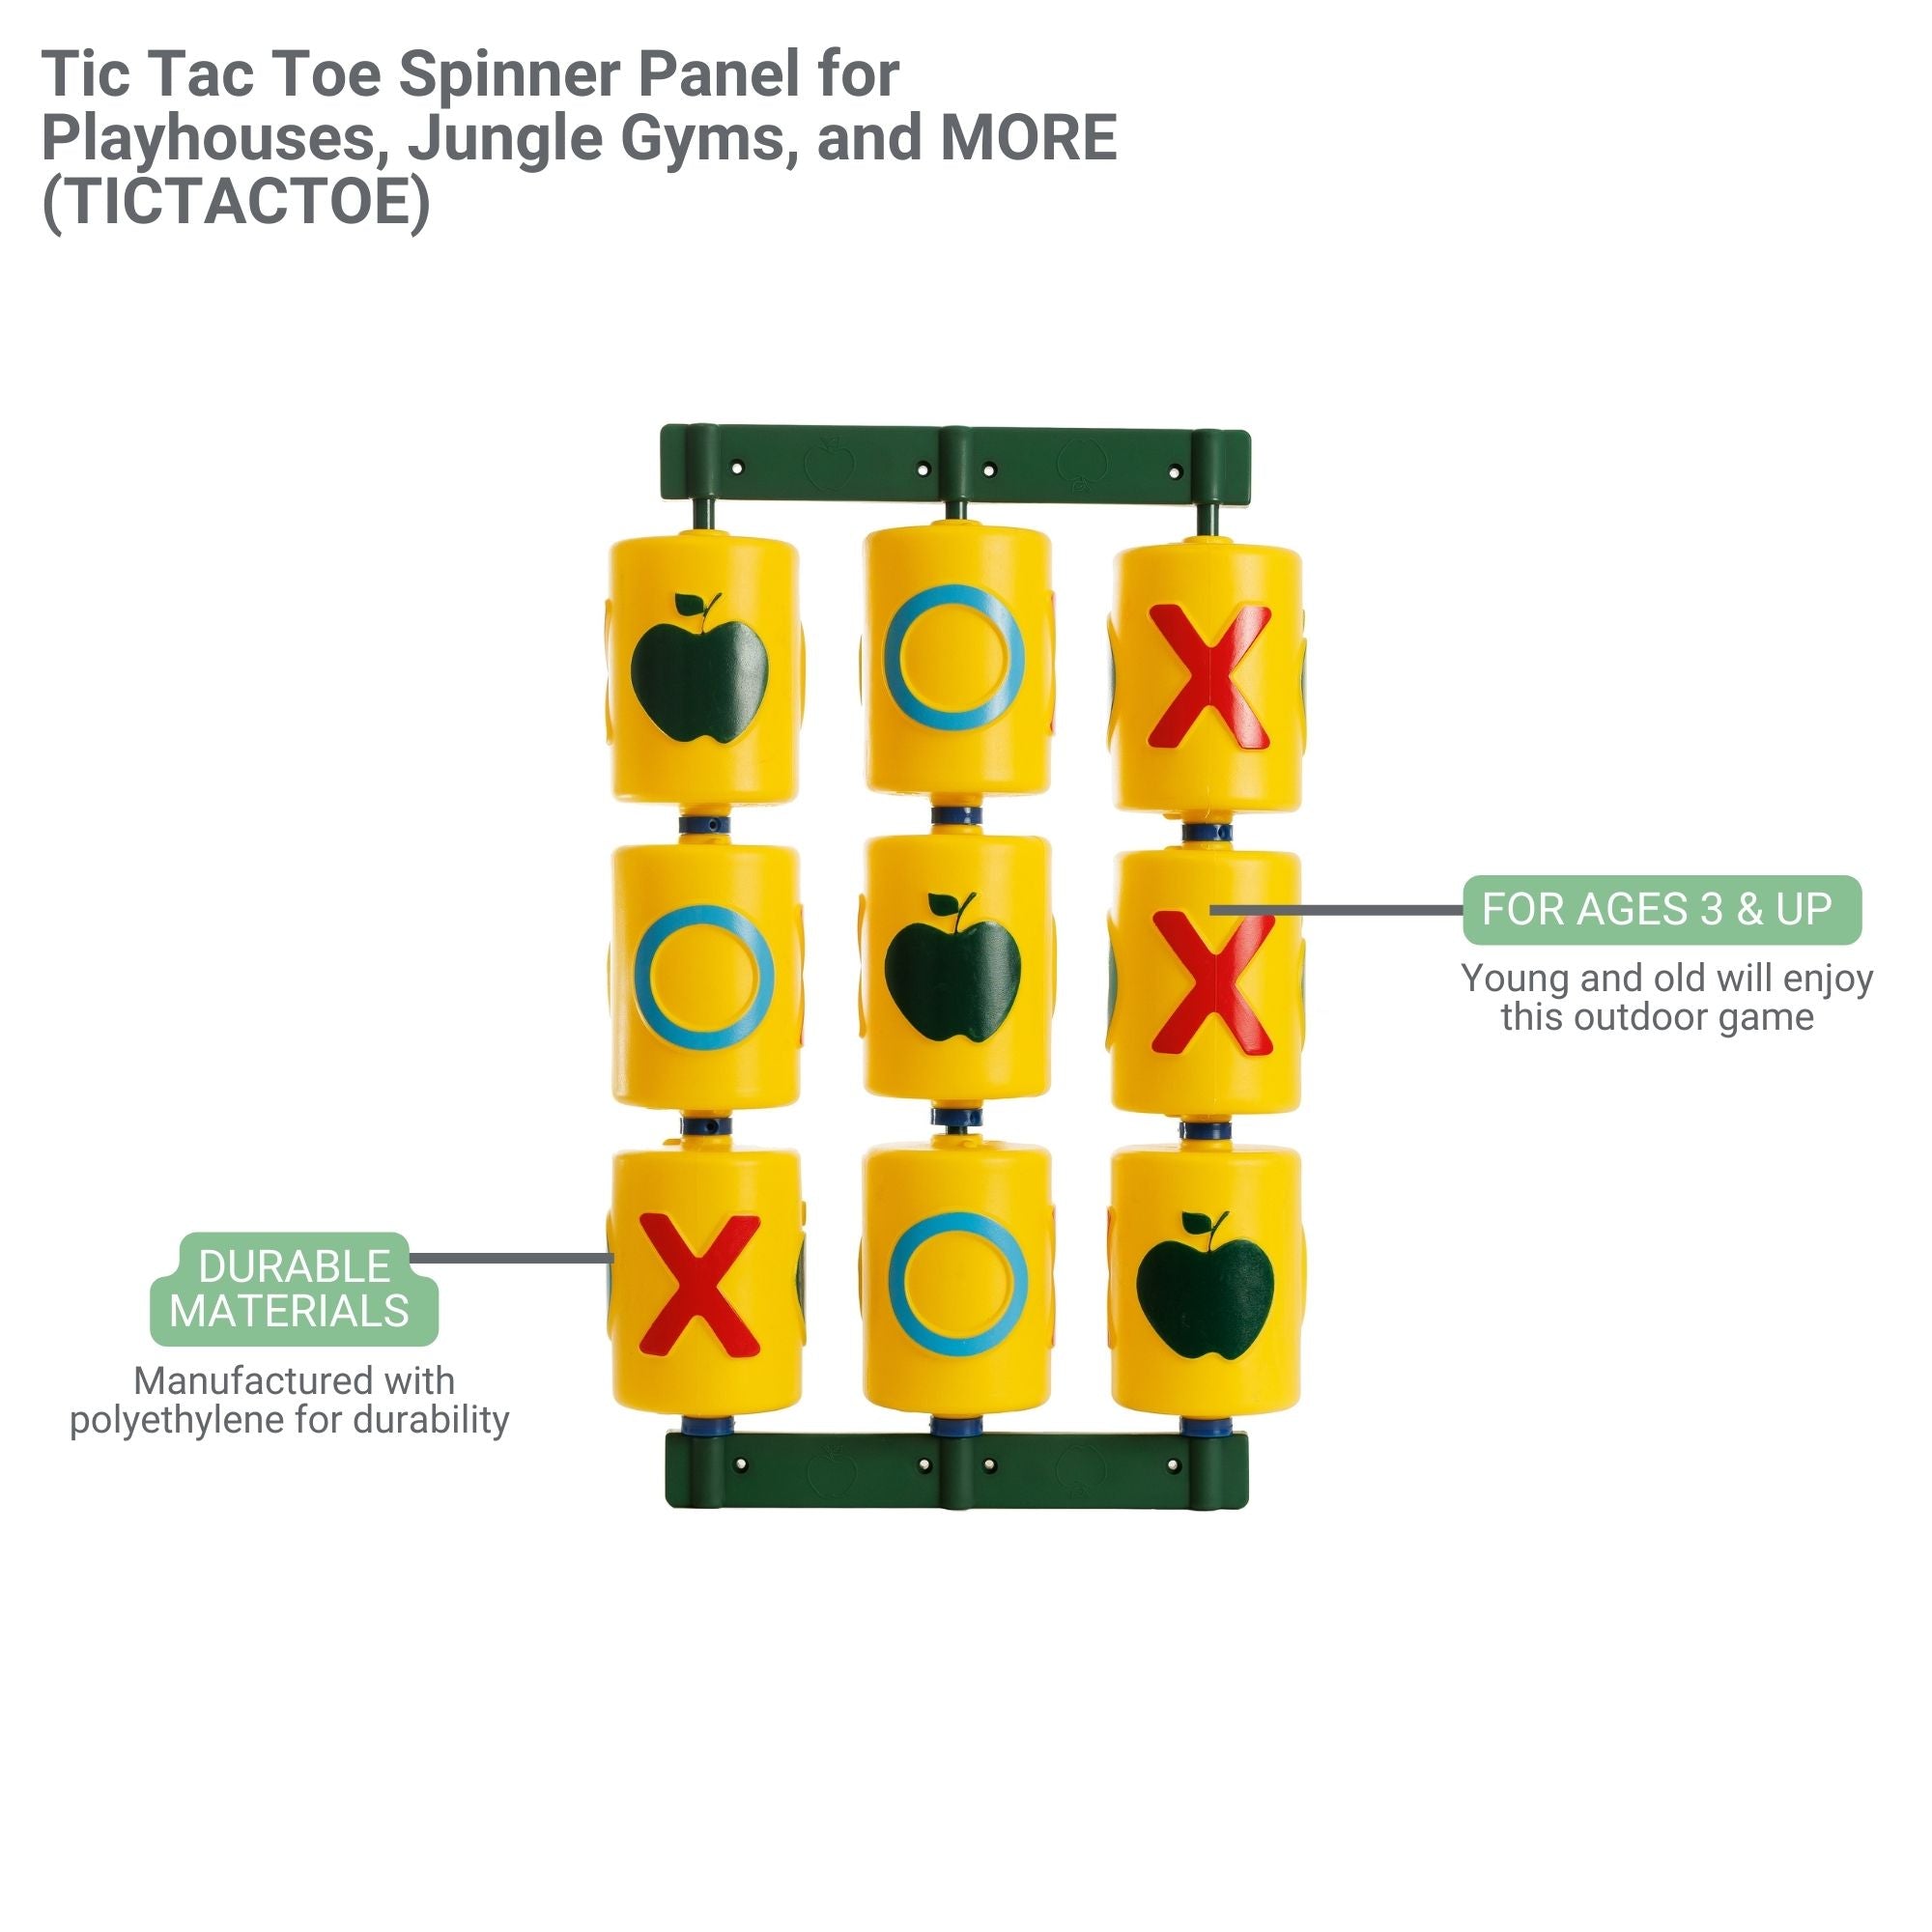 Tic Tac Toe Spinner Panel for Playhouses, Jungle Gyms, and MORE Product Features